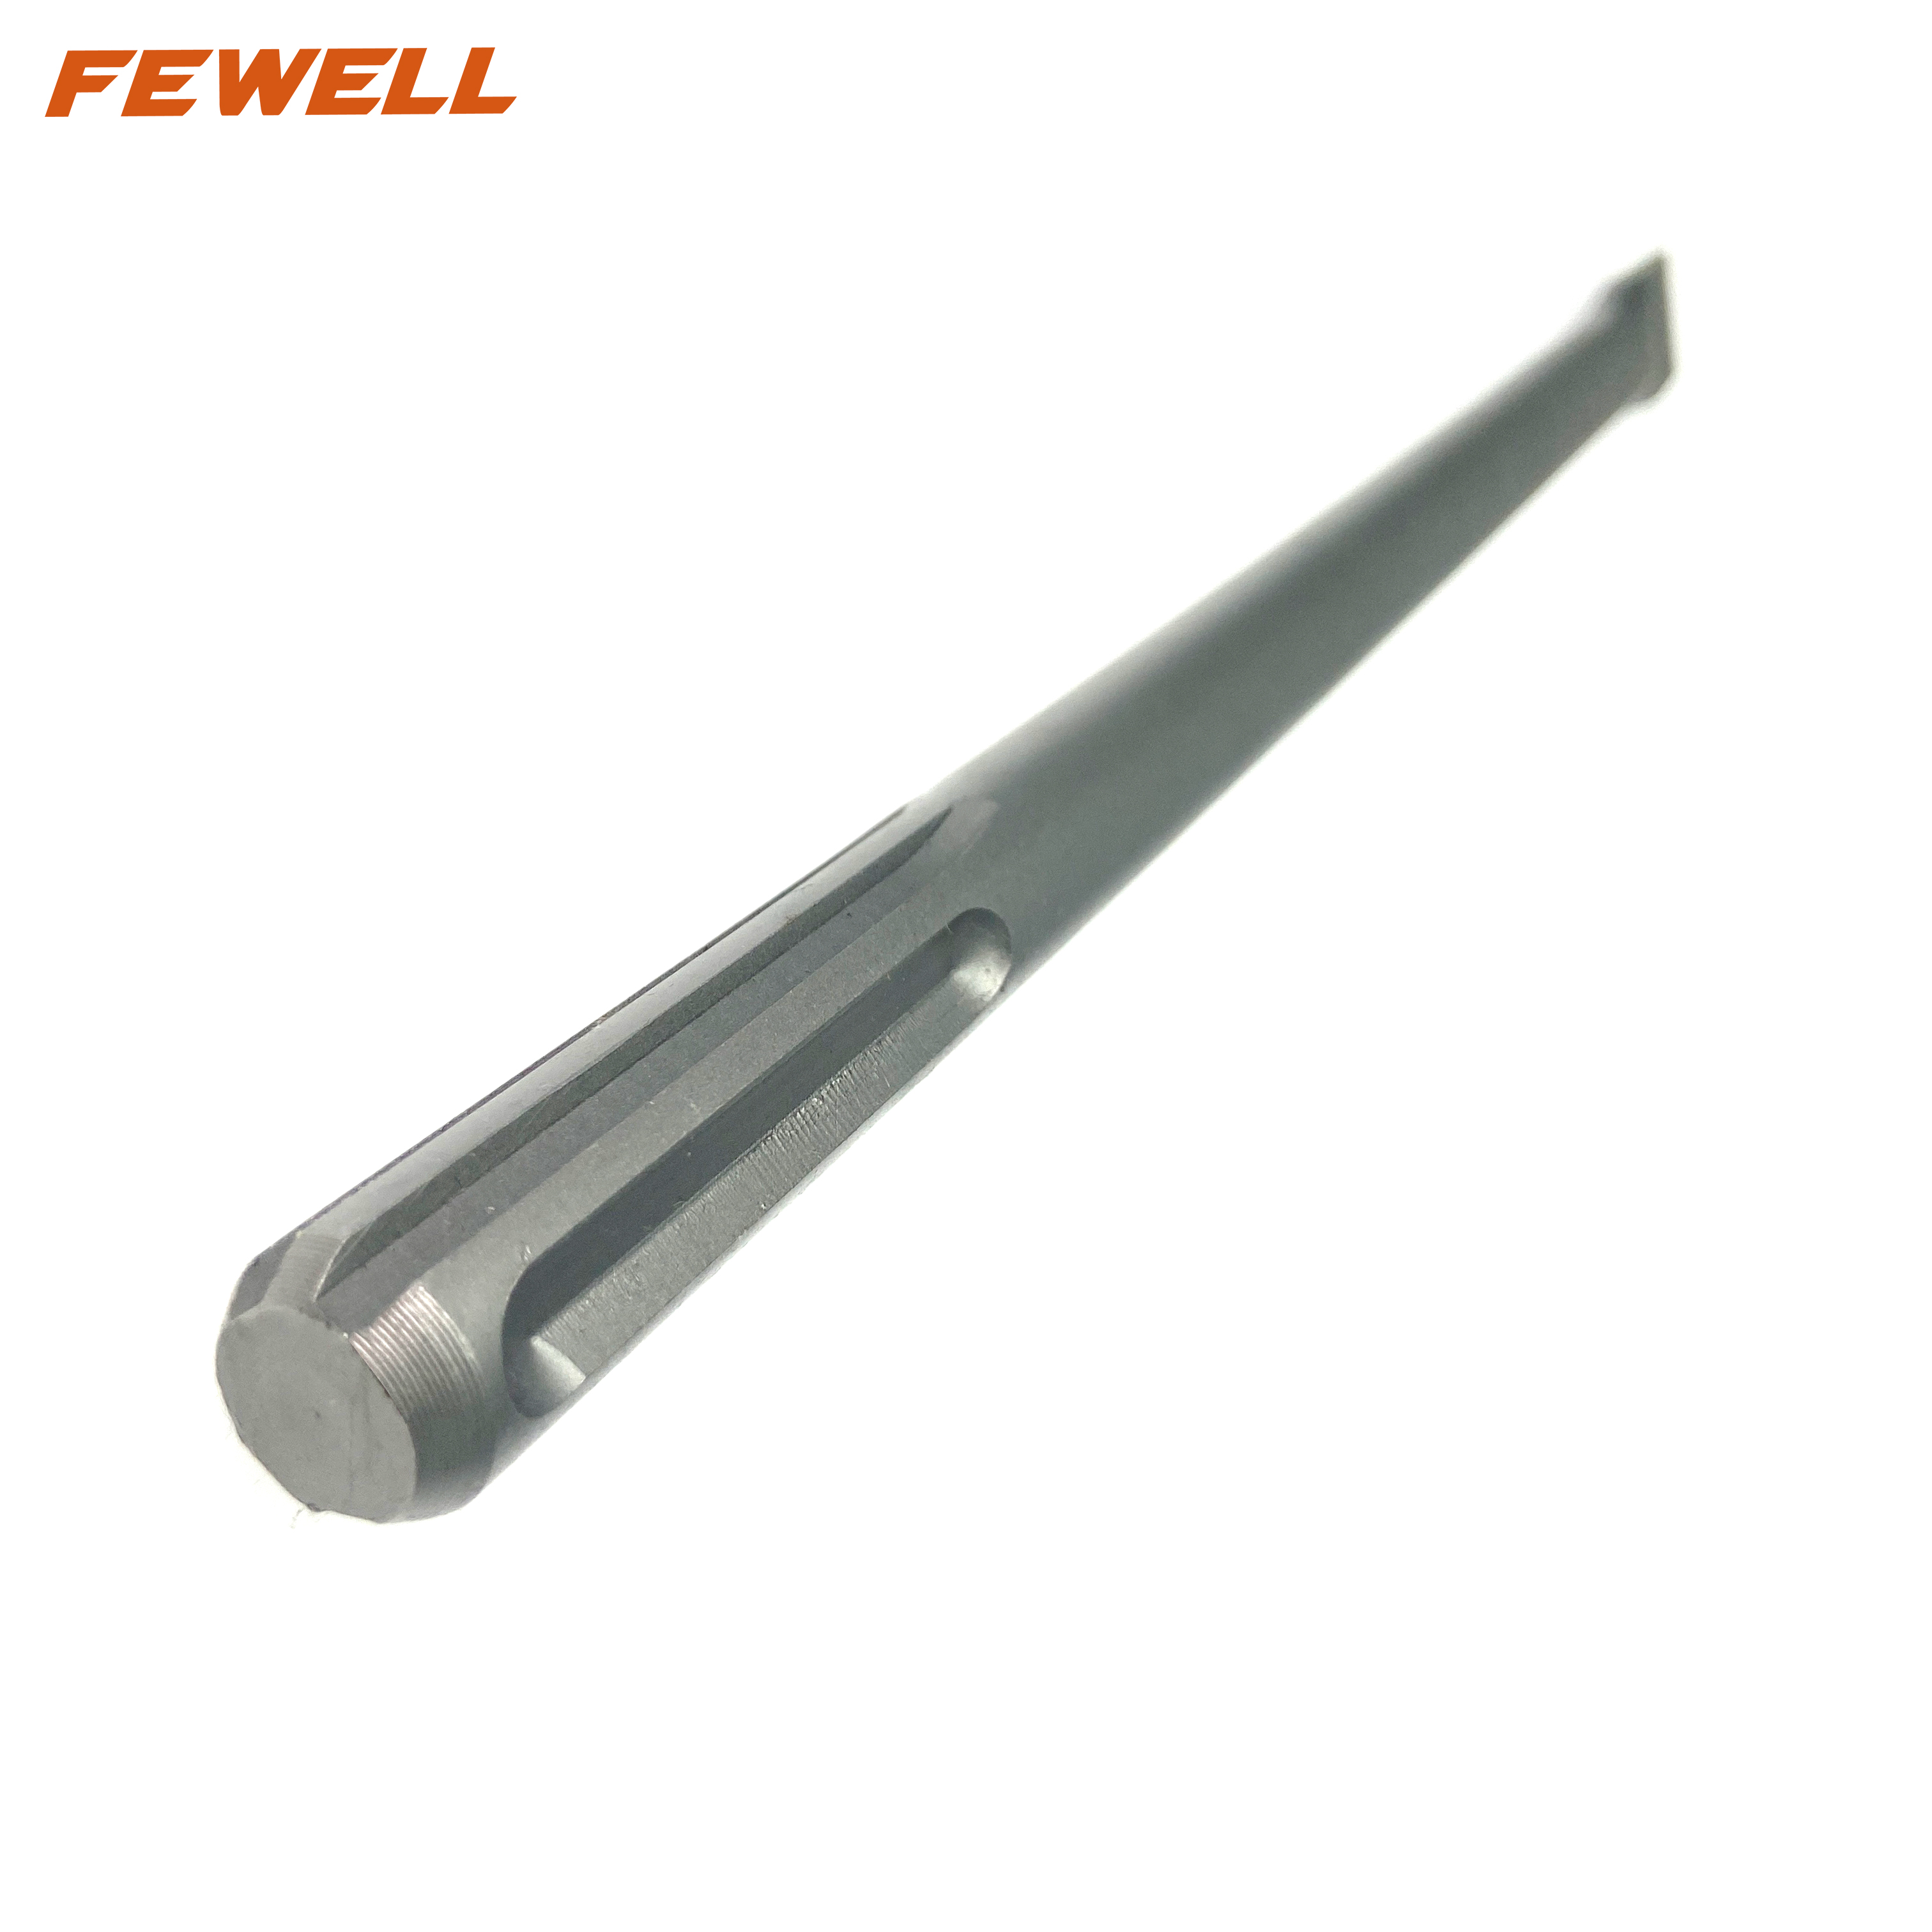 High quality 18x25mm Electric Hammer Drill Bit SDS MAX shank type Chisel for tile Masonry Concrete Brick stone